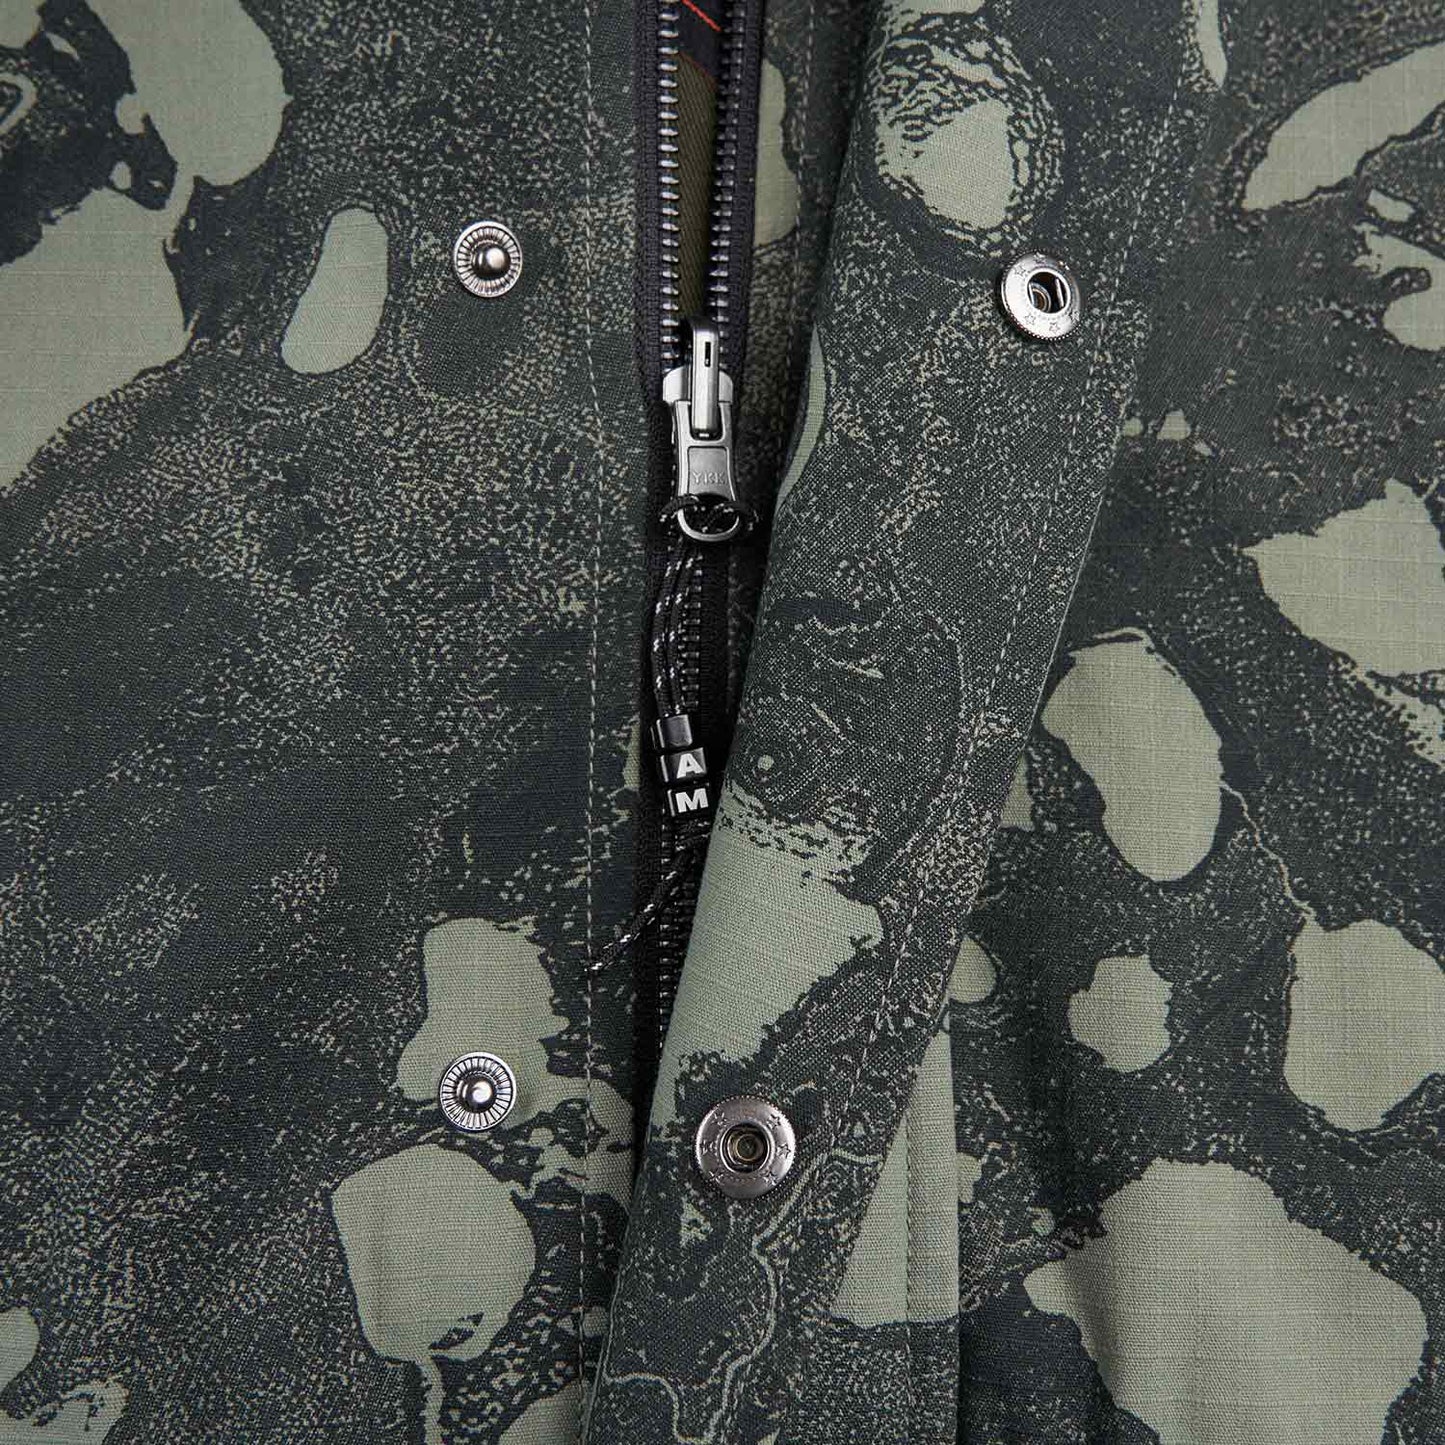 perks and mini reversible geo mapping parka jacket (swamp)